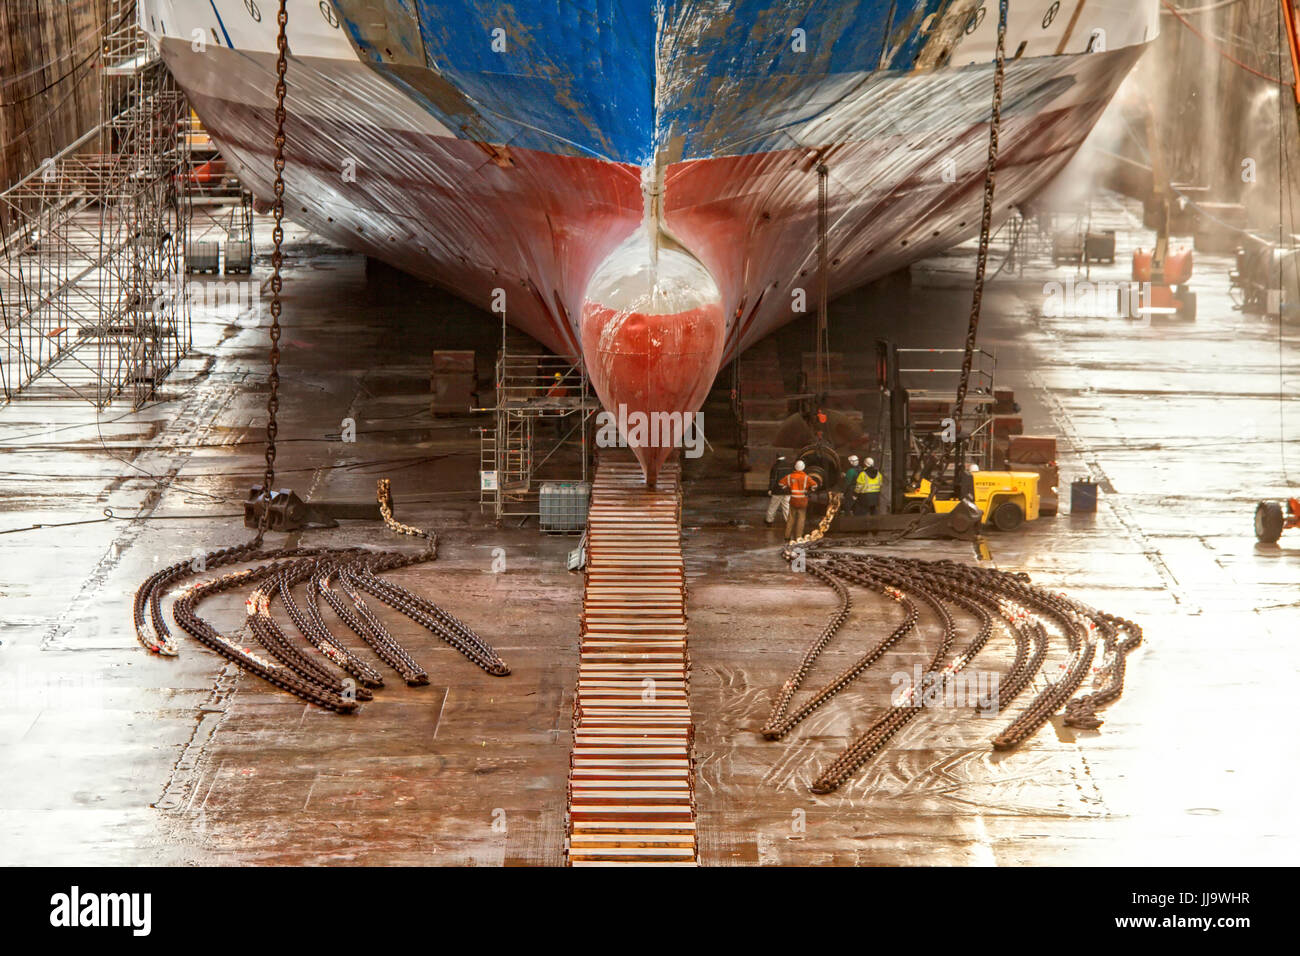 Built in 1994 France Chantier Naval de Marseille (CNdM) is a ship repair yard with modern and well equipped facilities, a highly skilled workforce, a wide network of specialists and strong teamwork ethic . Stock Photo